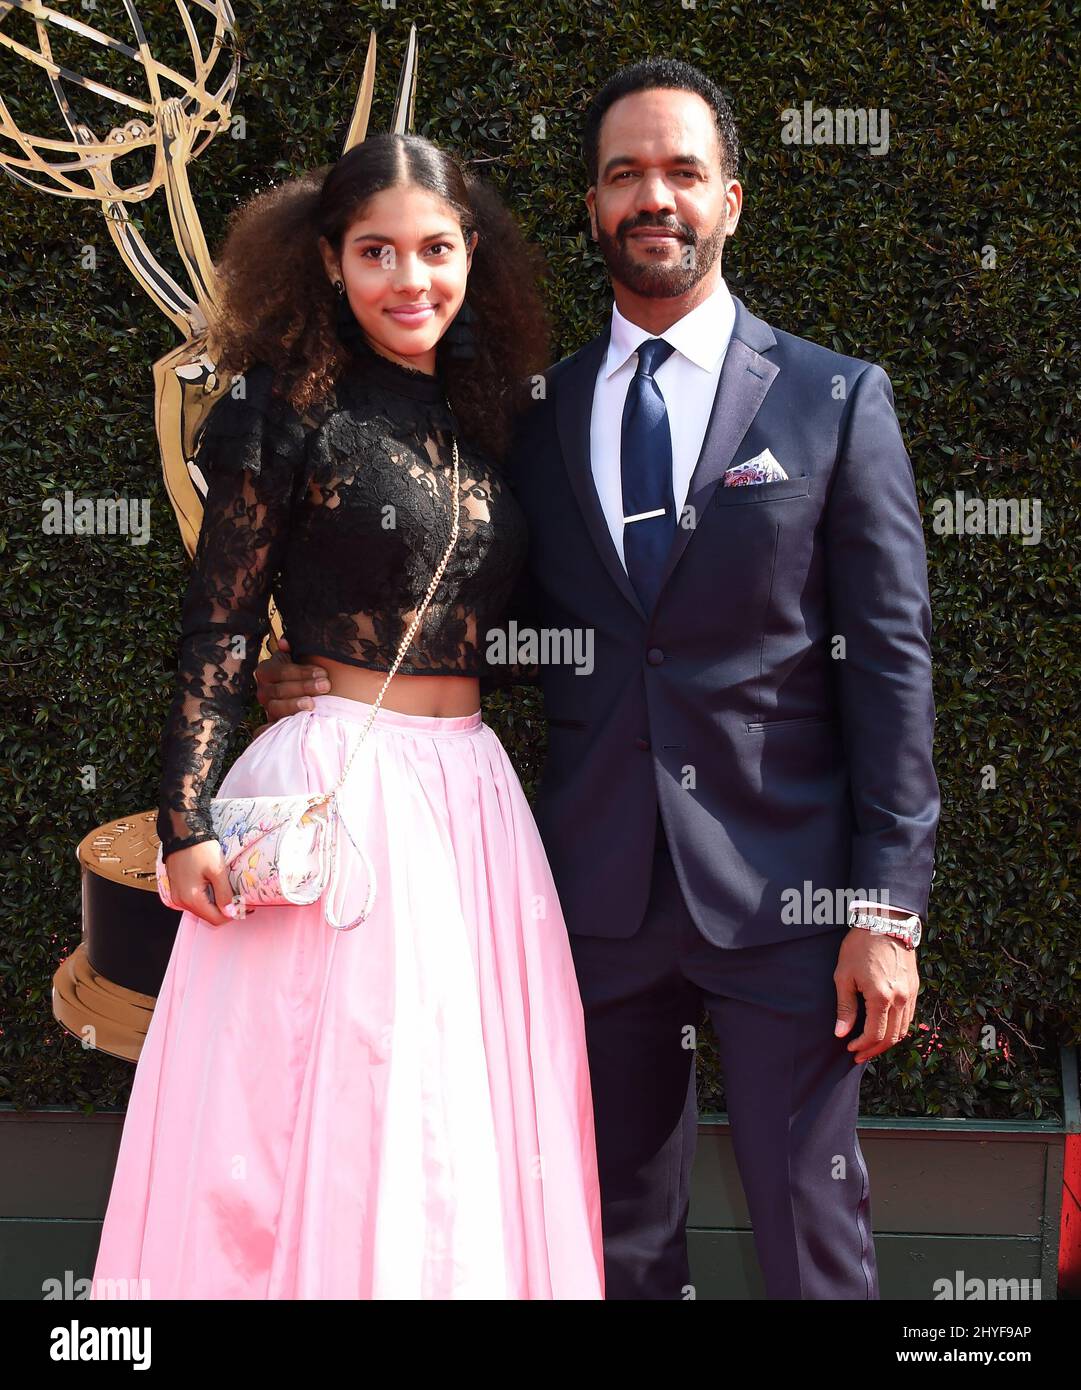 Kristoff St John arriving at the 45th Annual Daytime Emmy Awards held at the Pasadena Civic Center on April 29, 2018 in Pasadena, CA Stock Photo